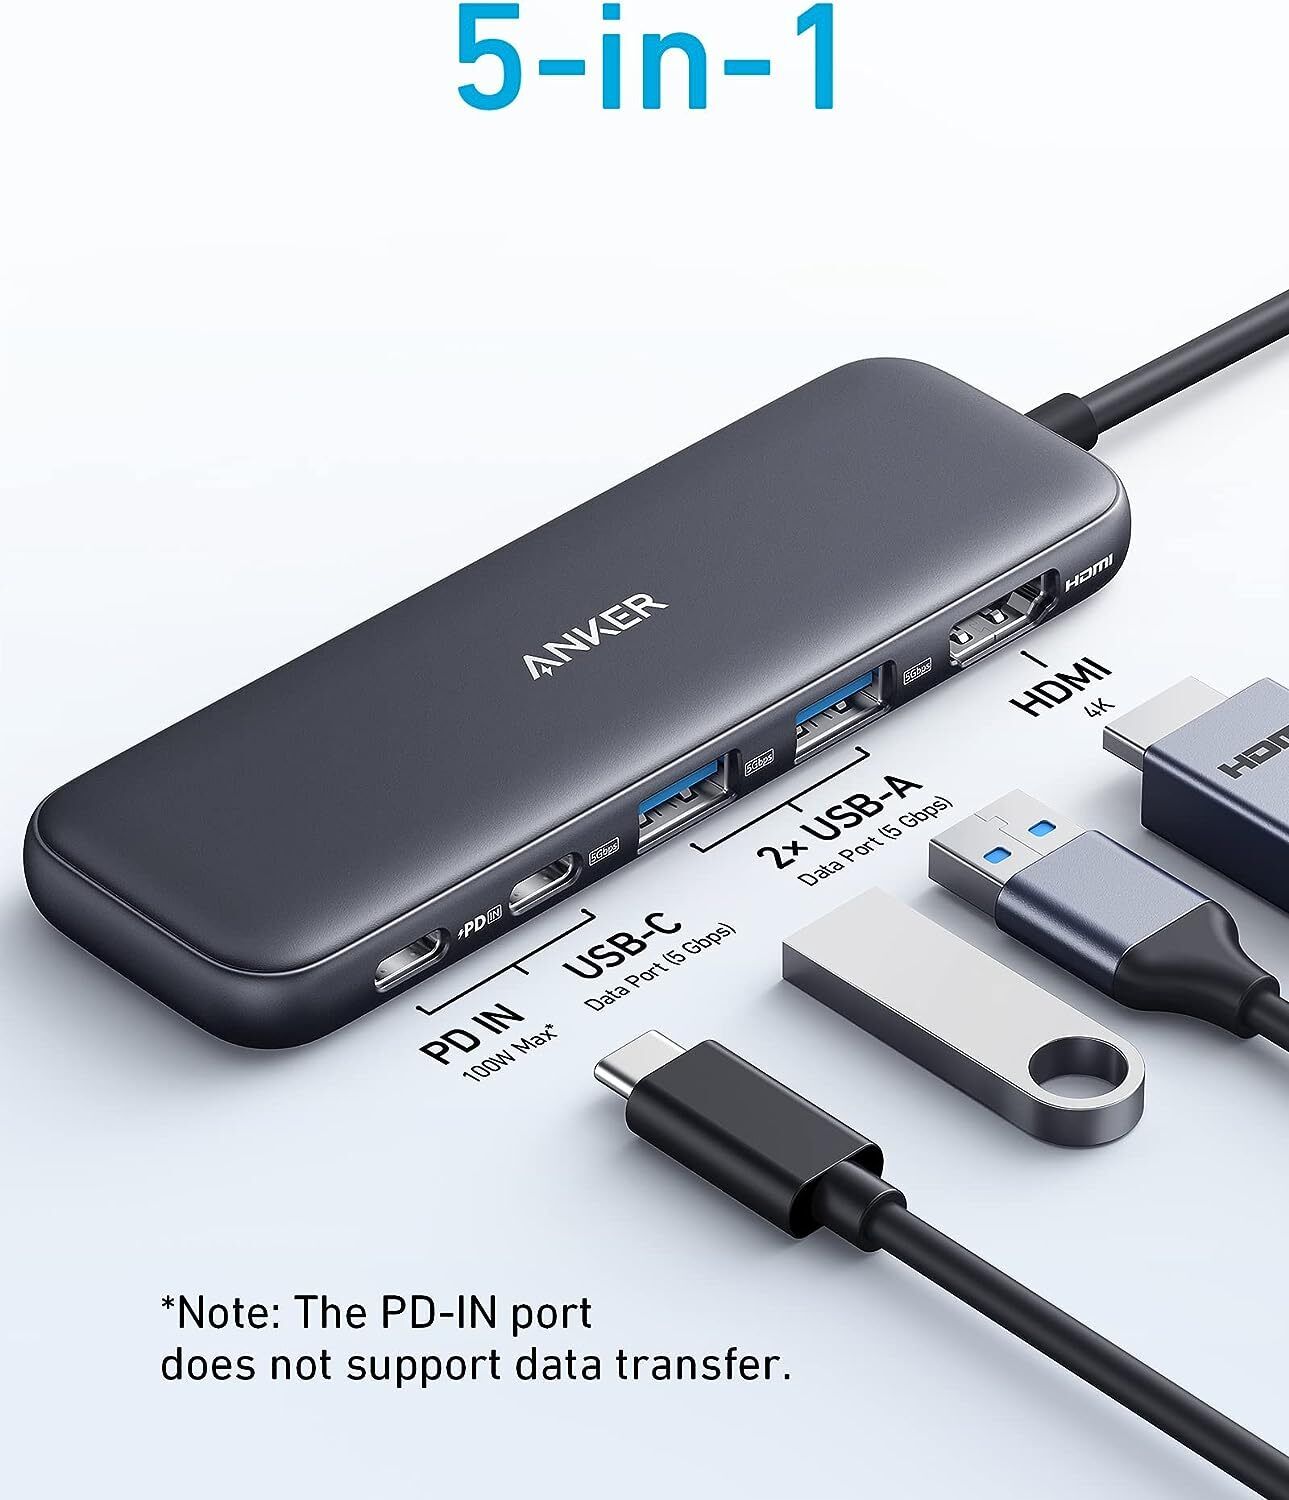 Anker Play Anker 332 USB-C Hub Adapter 5-in-1 4K HDMI Display 85W Charge for MacBook/Laptop